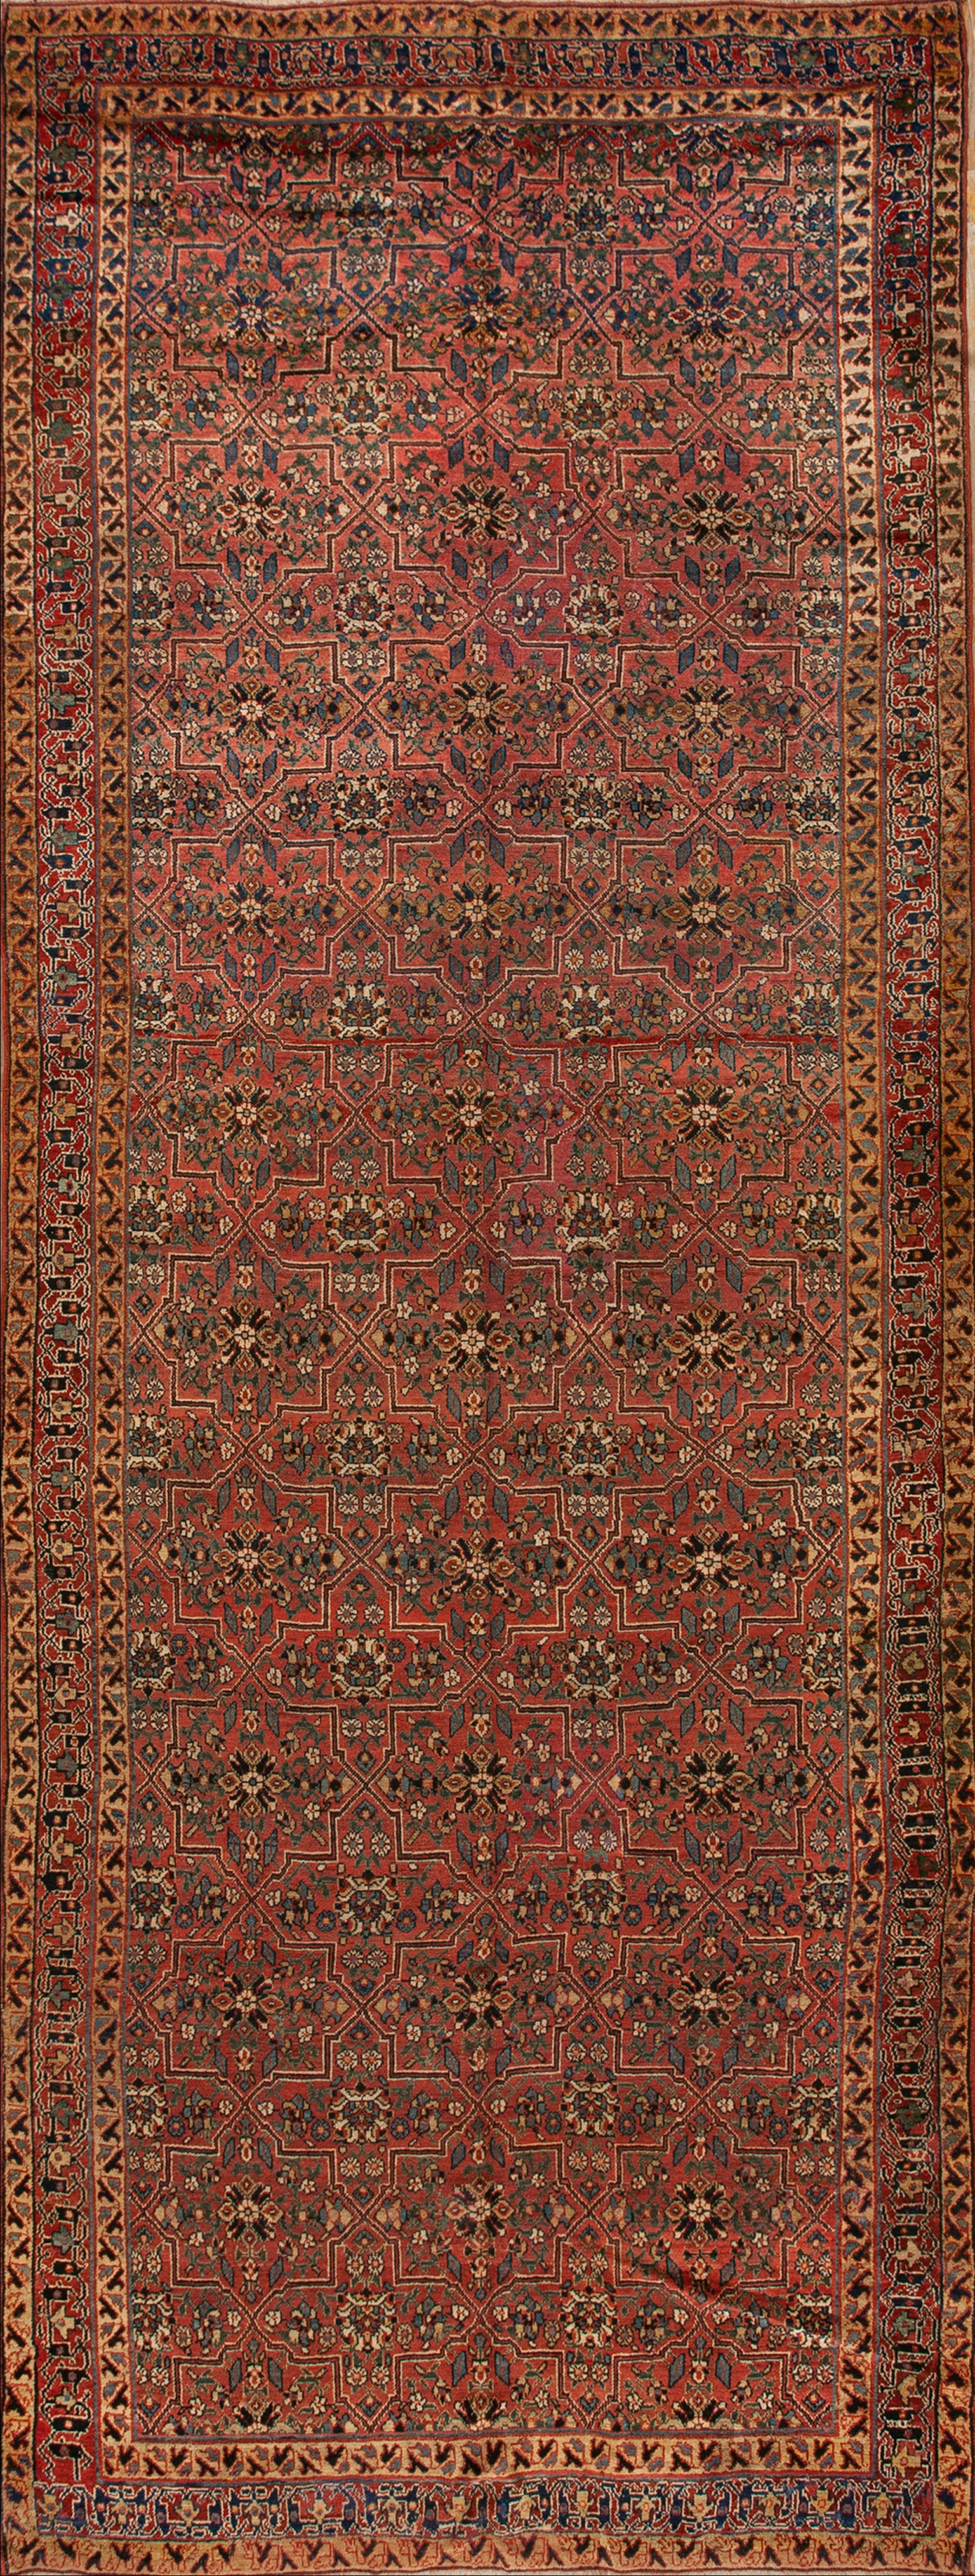 19th Century N.W. Persian Galley Carpet ( 6'6" x 17'6" - 198 x 533 ) For Sale